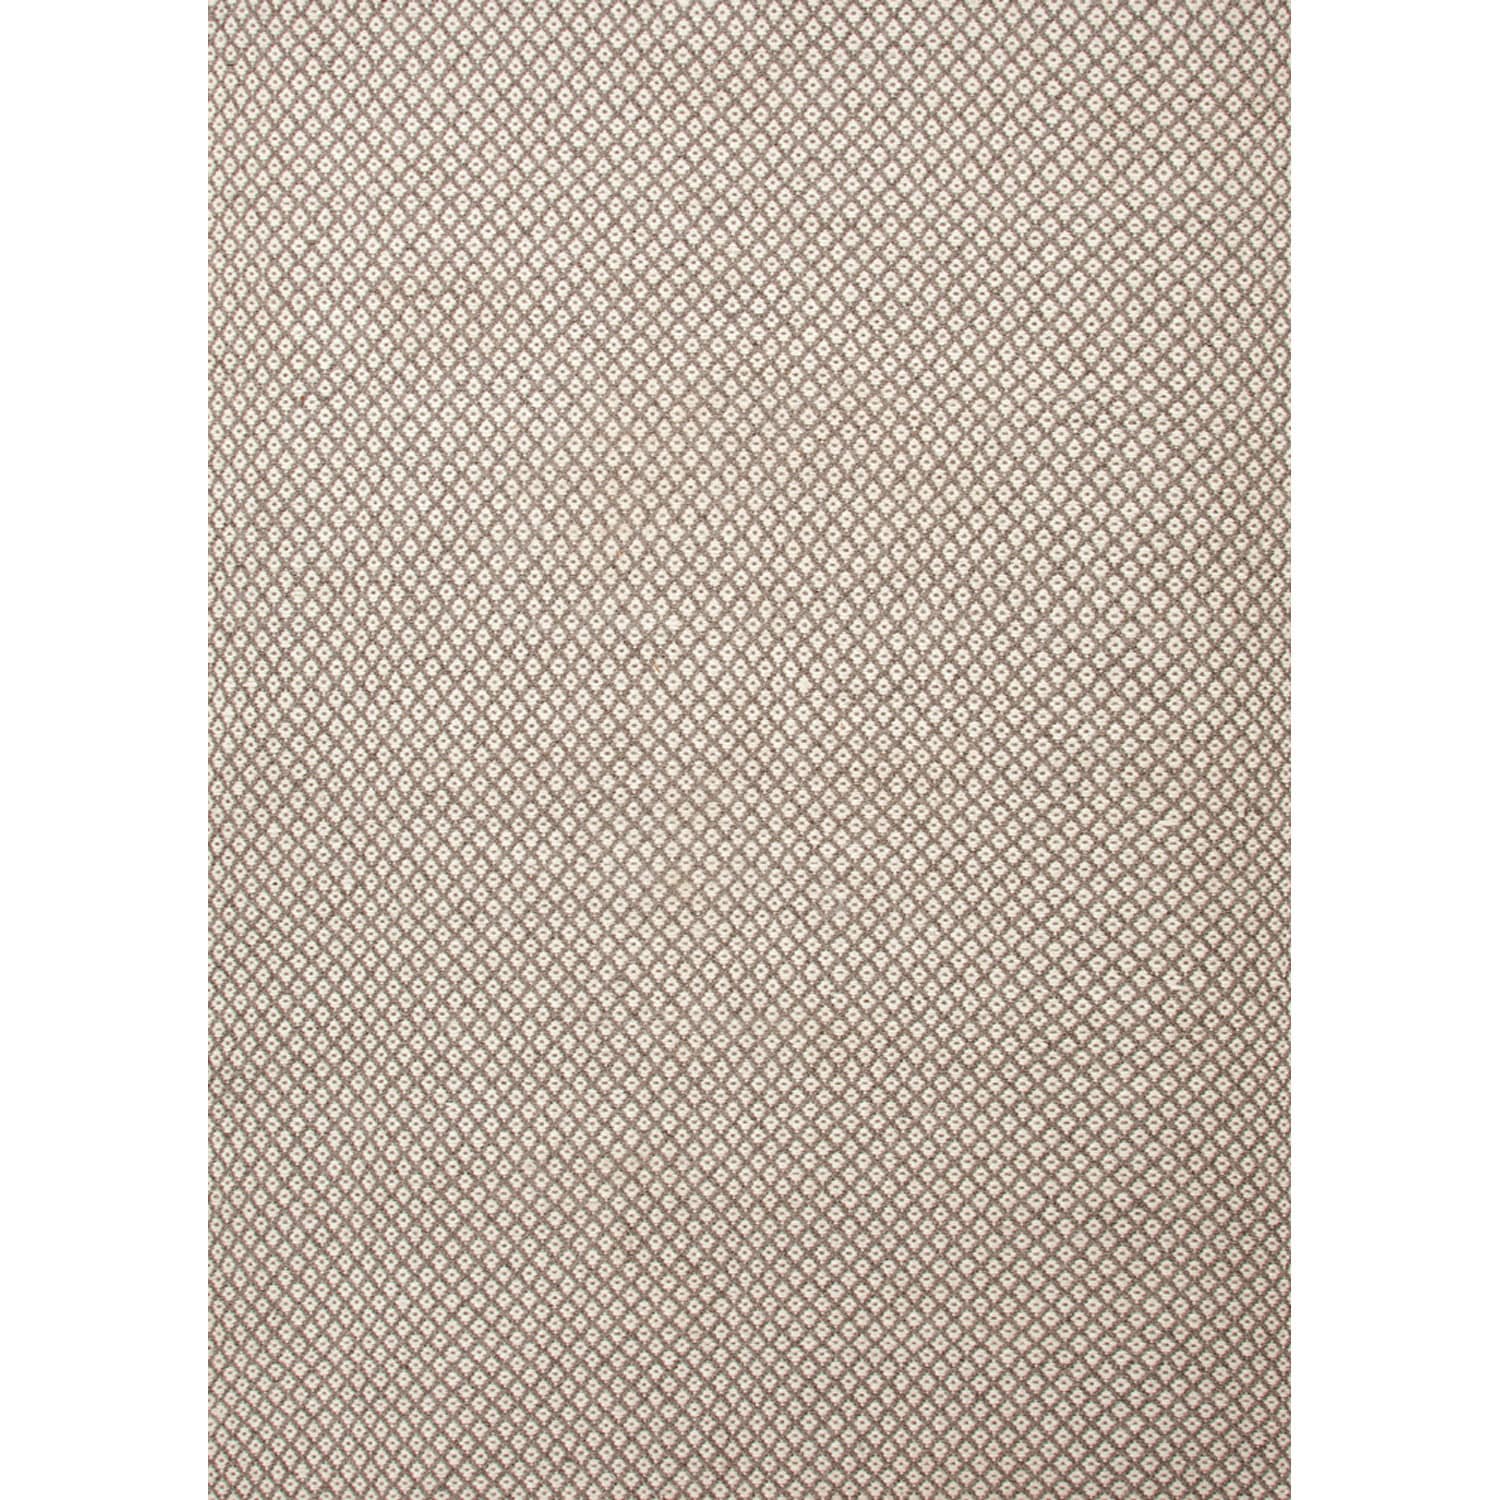 Handmade Flat weave Solid pattern Brown Accent Rug (2 X 3)